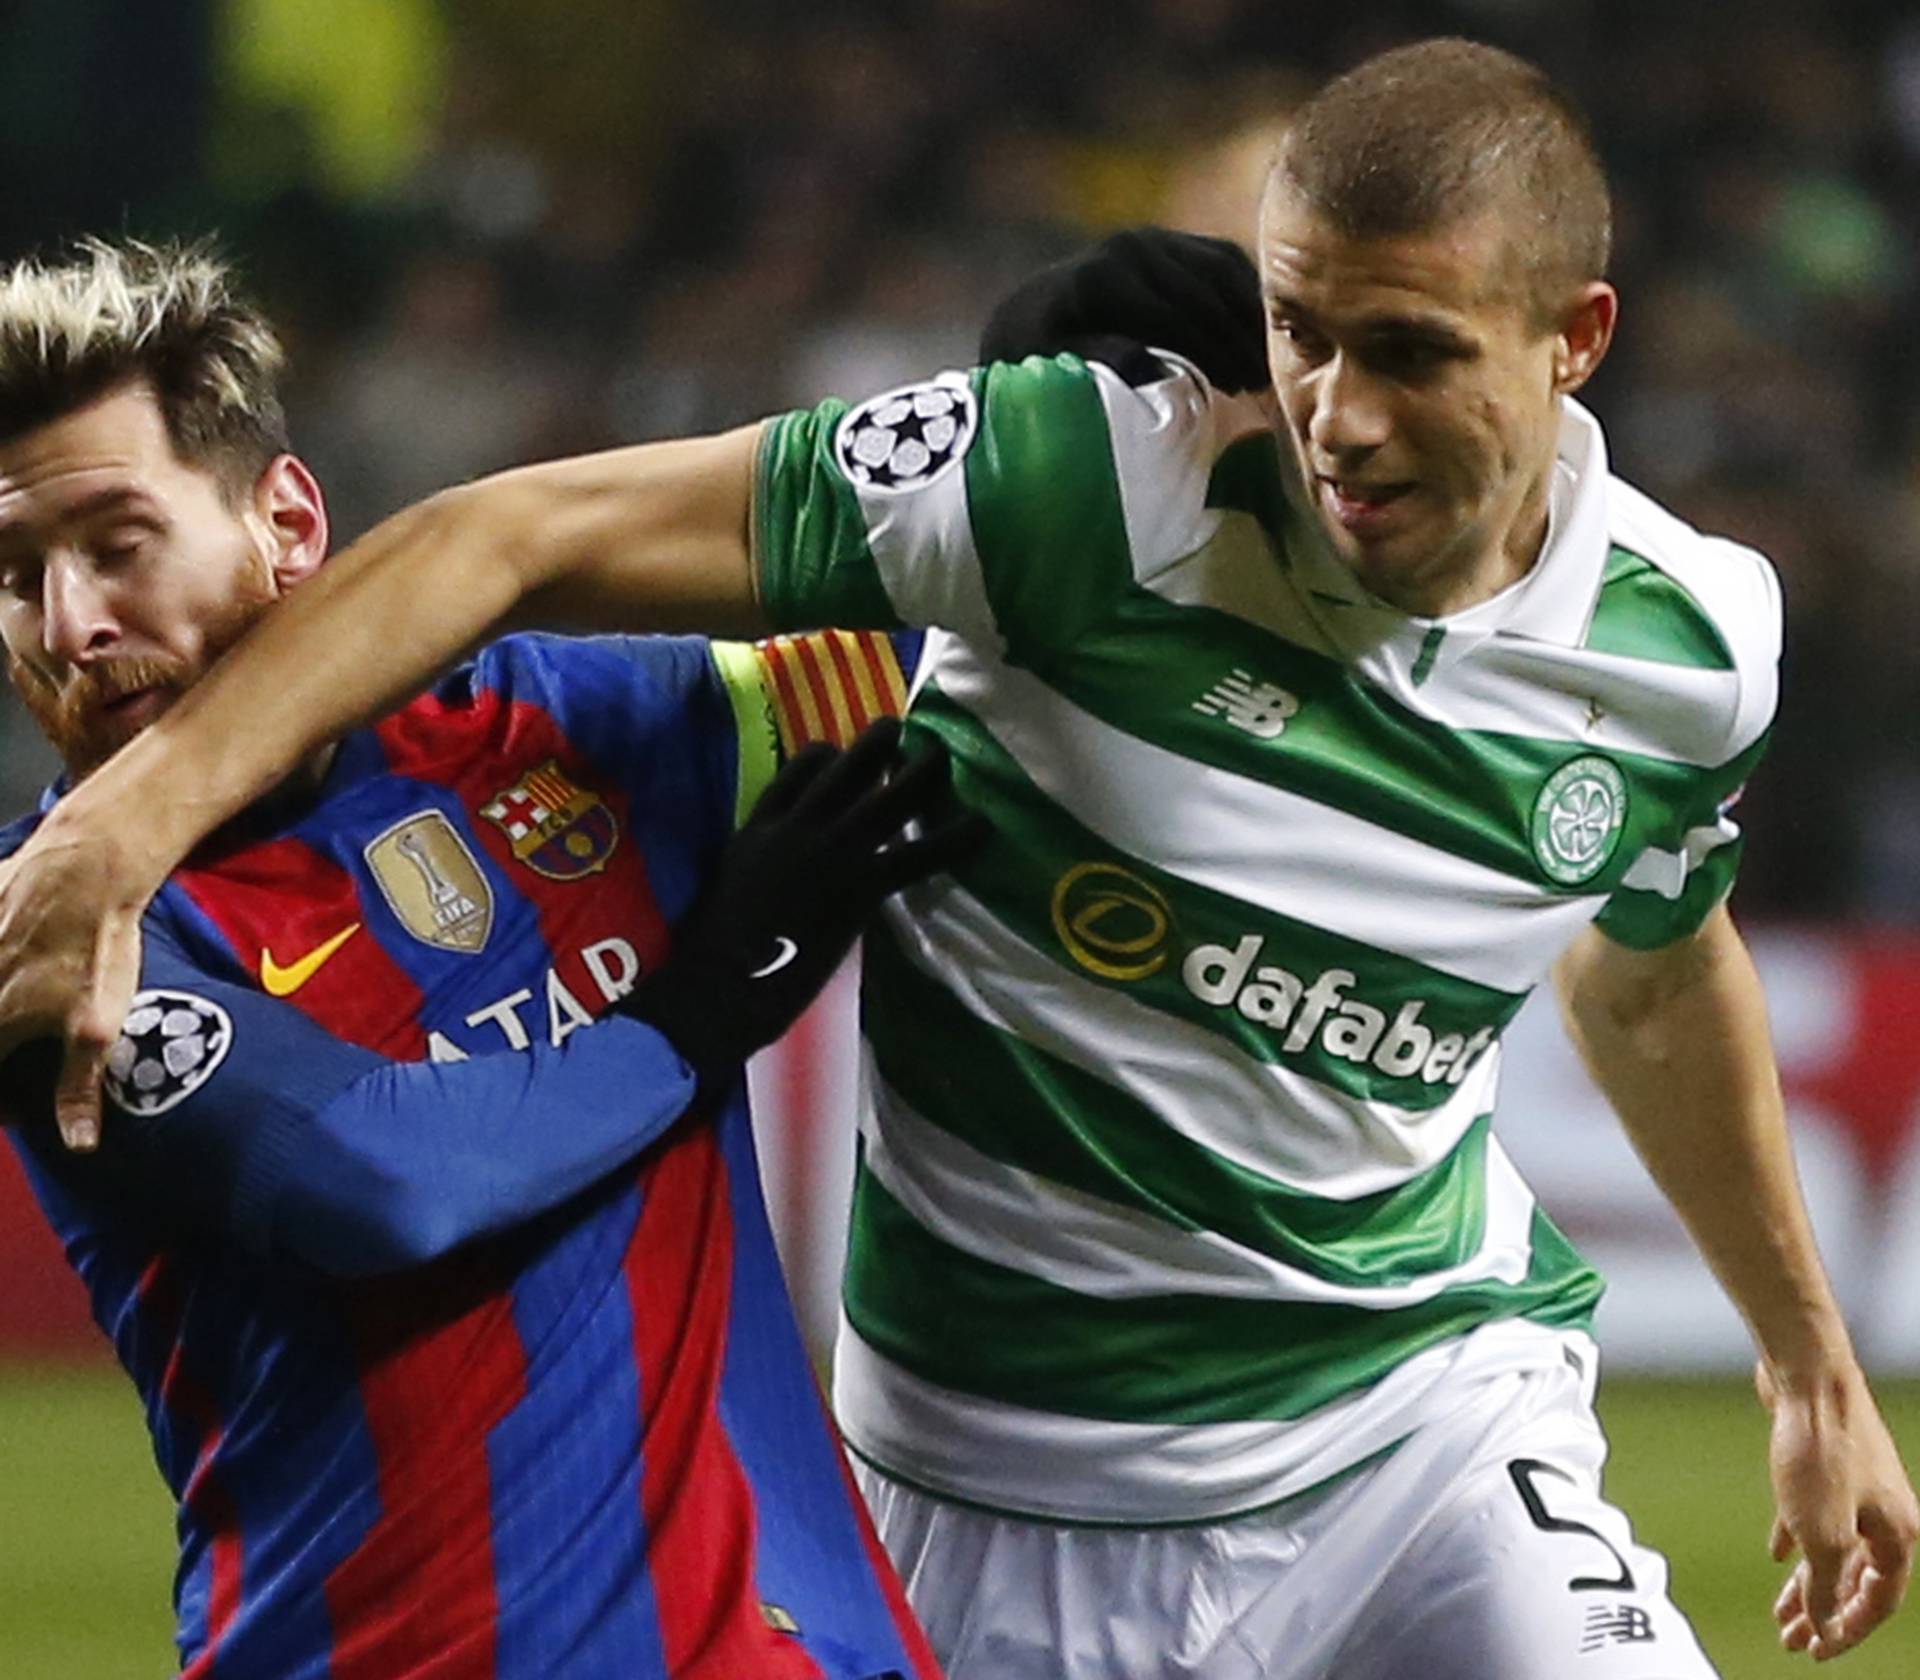 Celtic's Jozo Simunovic in action with Barcelona's Lionel Messi